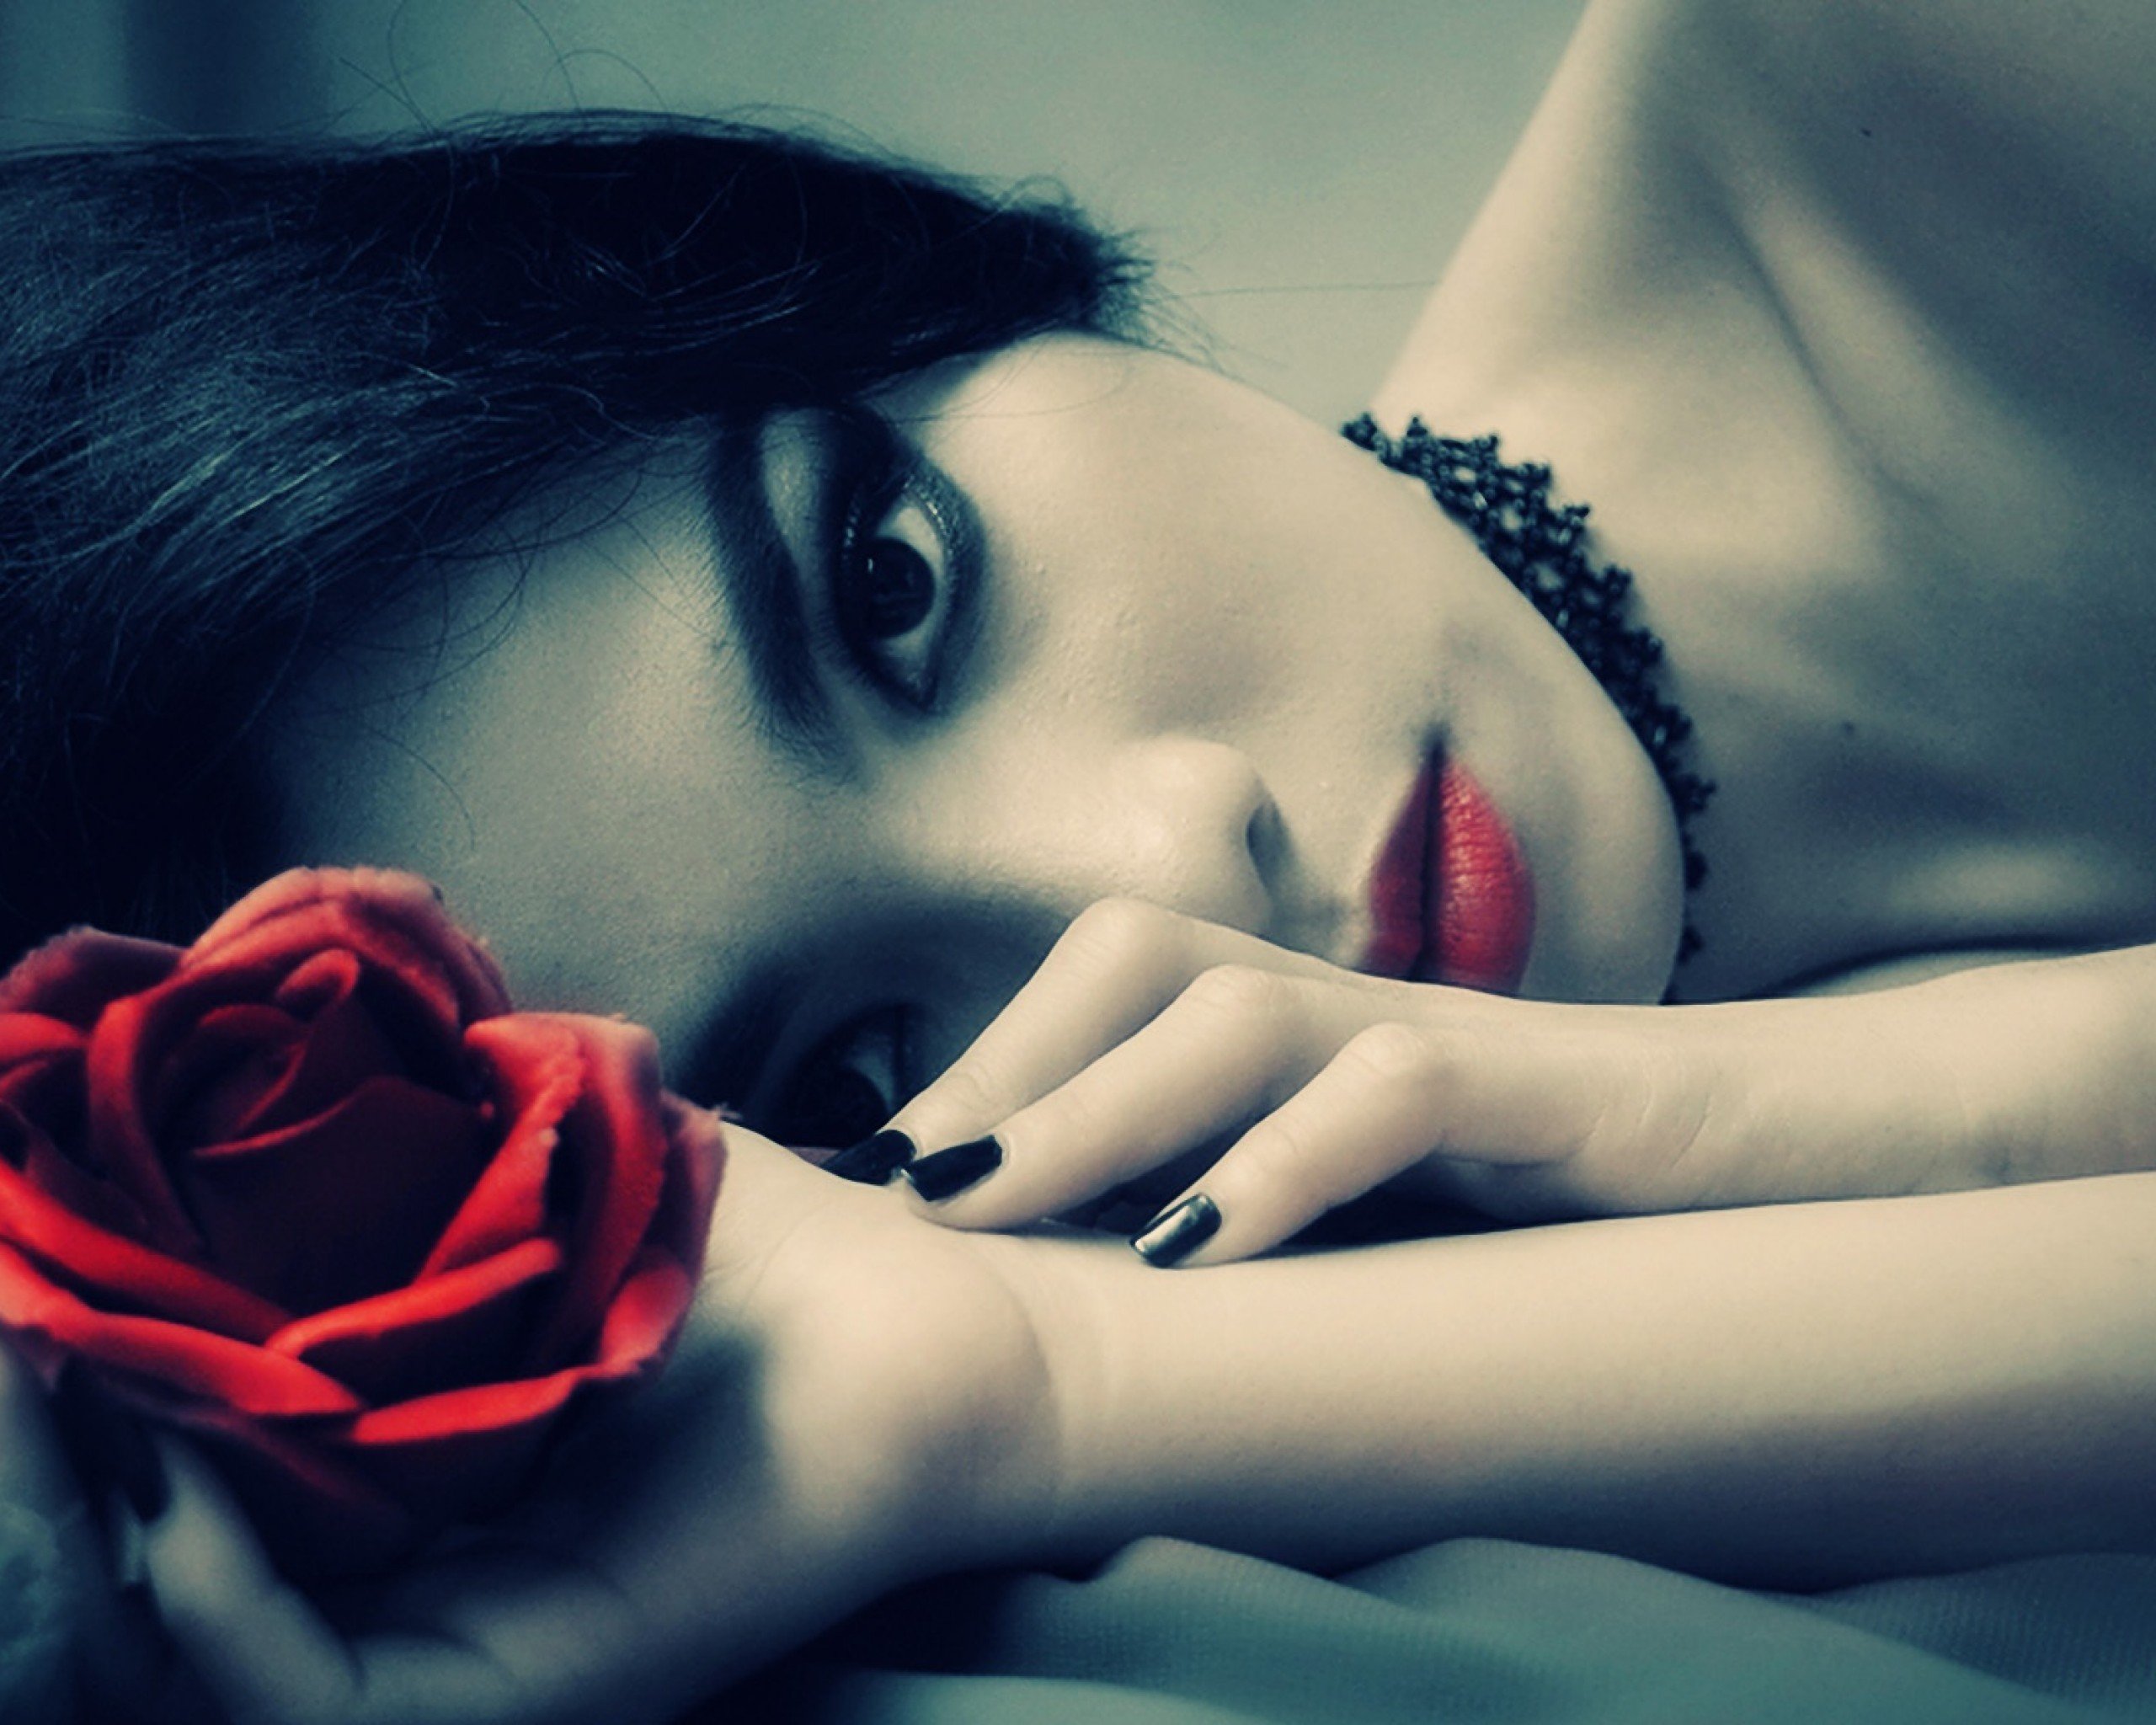 lonely, Mood, Sad, Alone, Sadness, Emotion, People, Loneliness, Solitude, Sorrow, Gothic, Rose, Pale, Witch, Fantasy, Girl, Babe Wallpaper